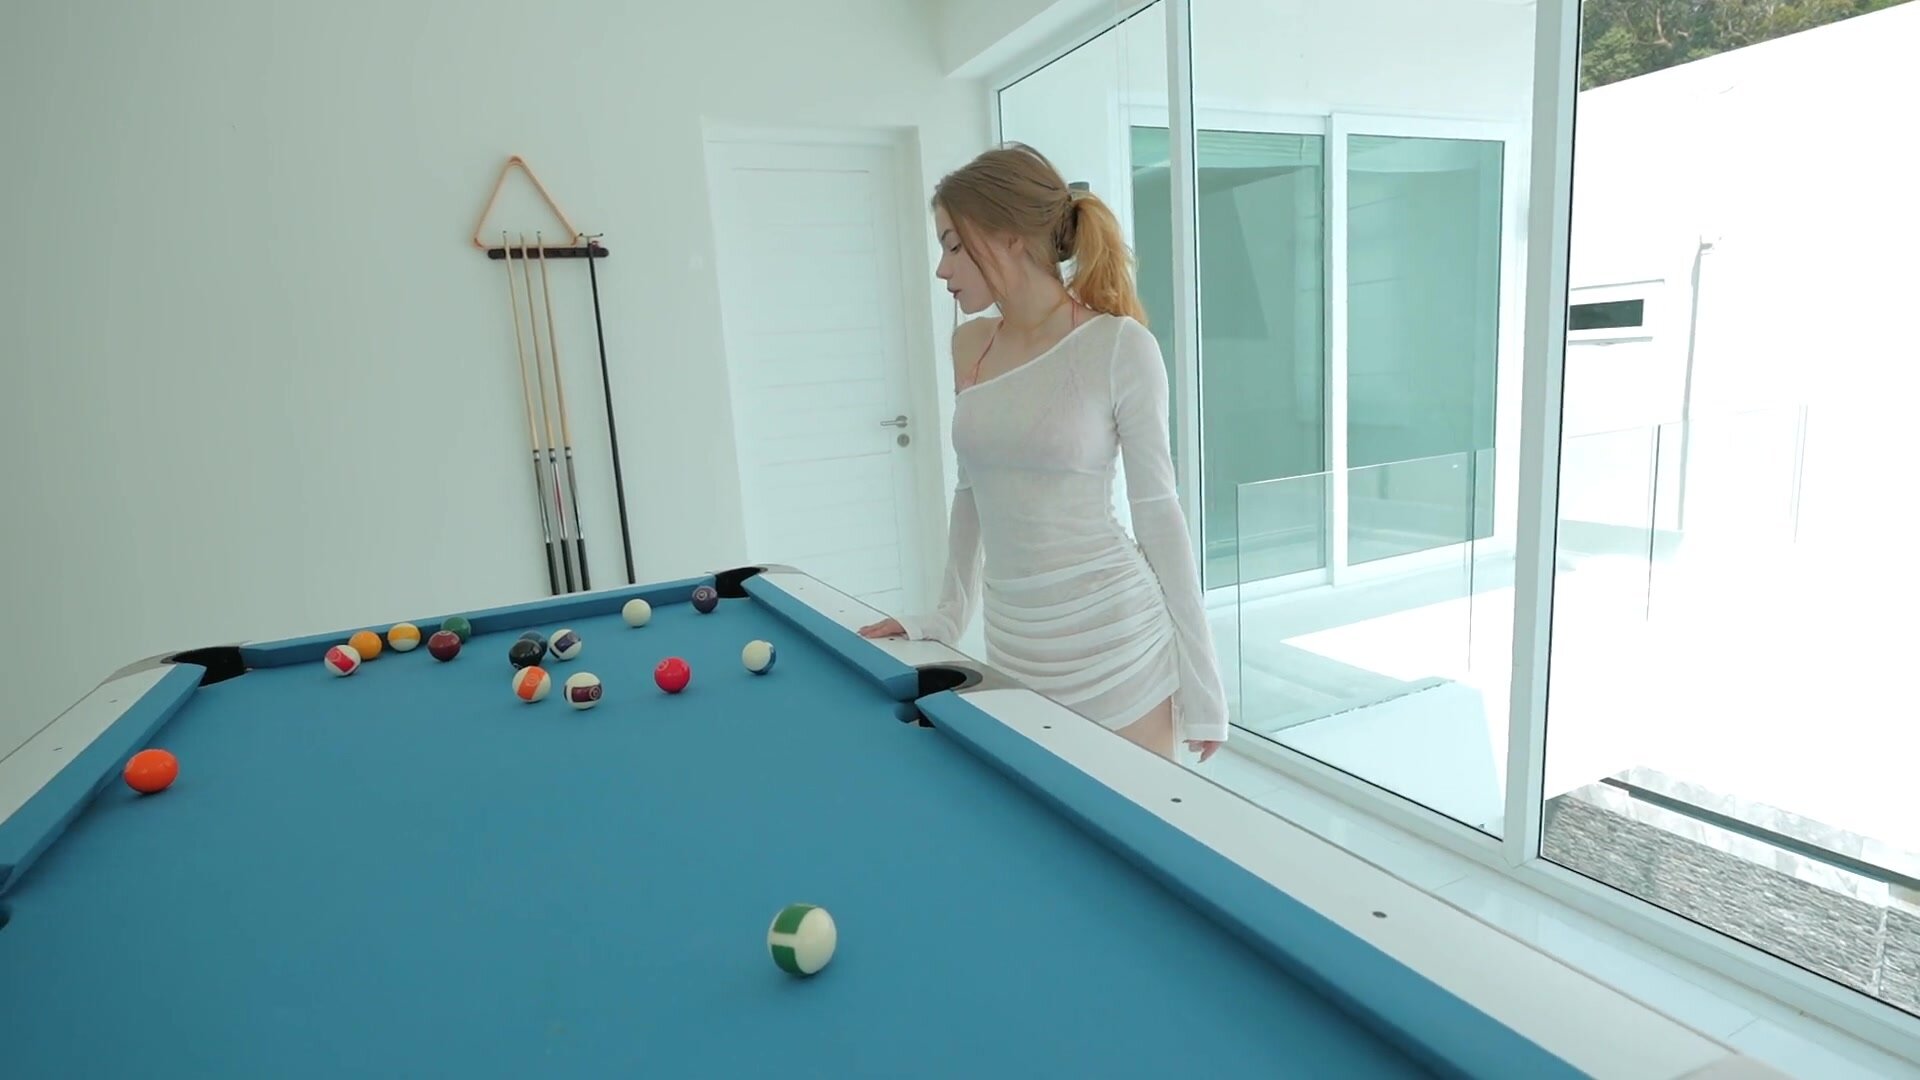 Diana Rider - Fucked A Beautiful Teen on the Pool Table while Her Boyfriend was Away